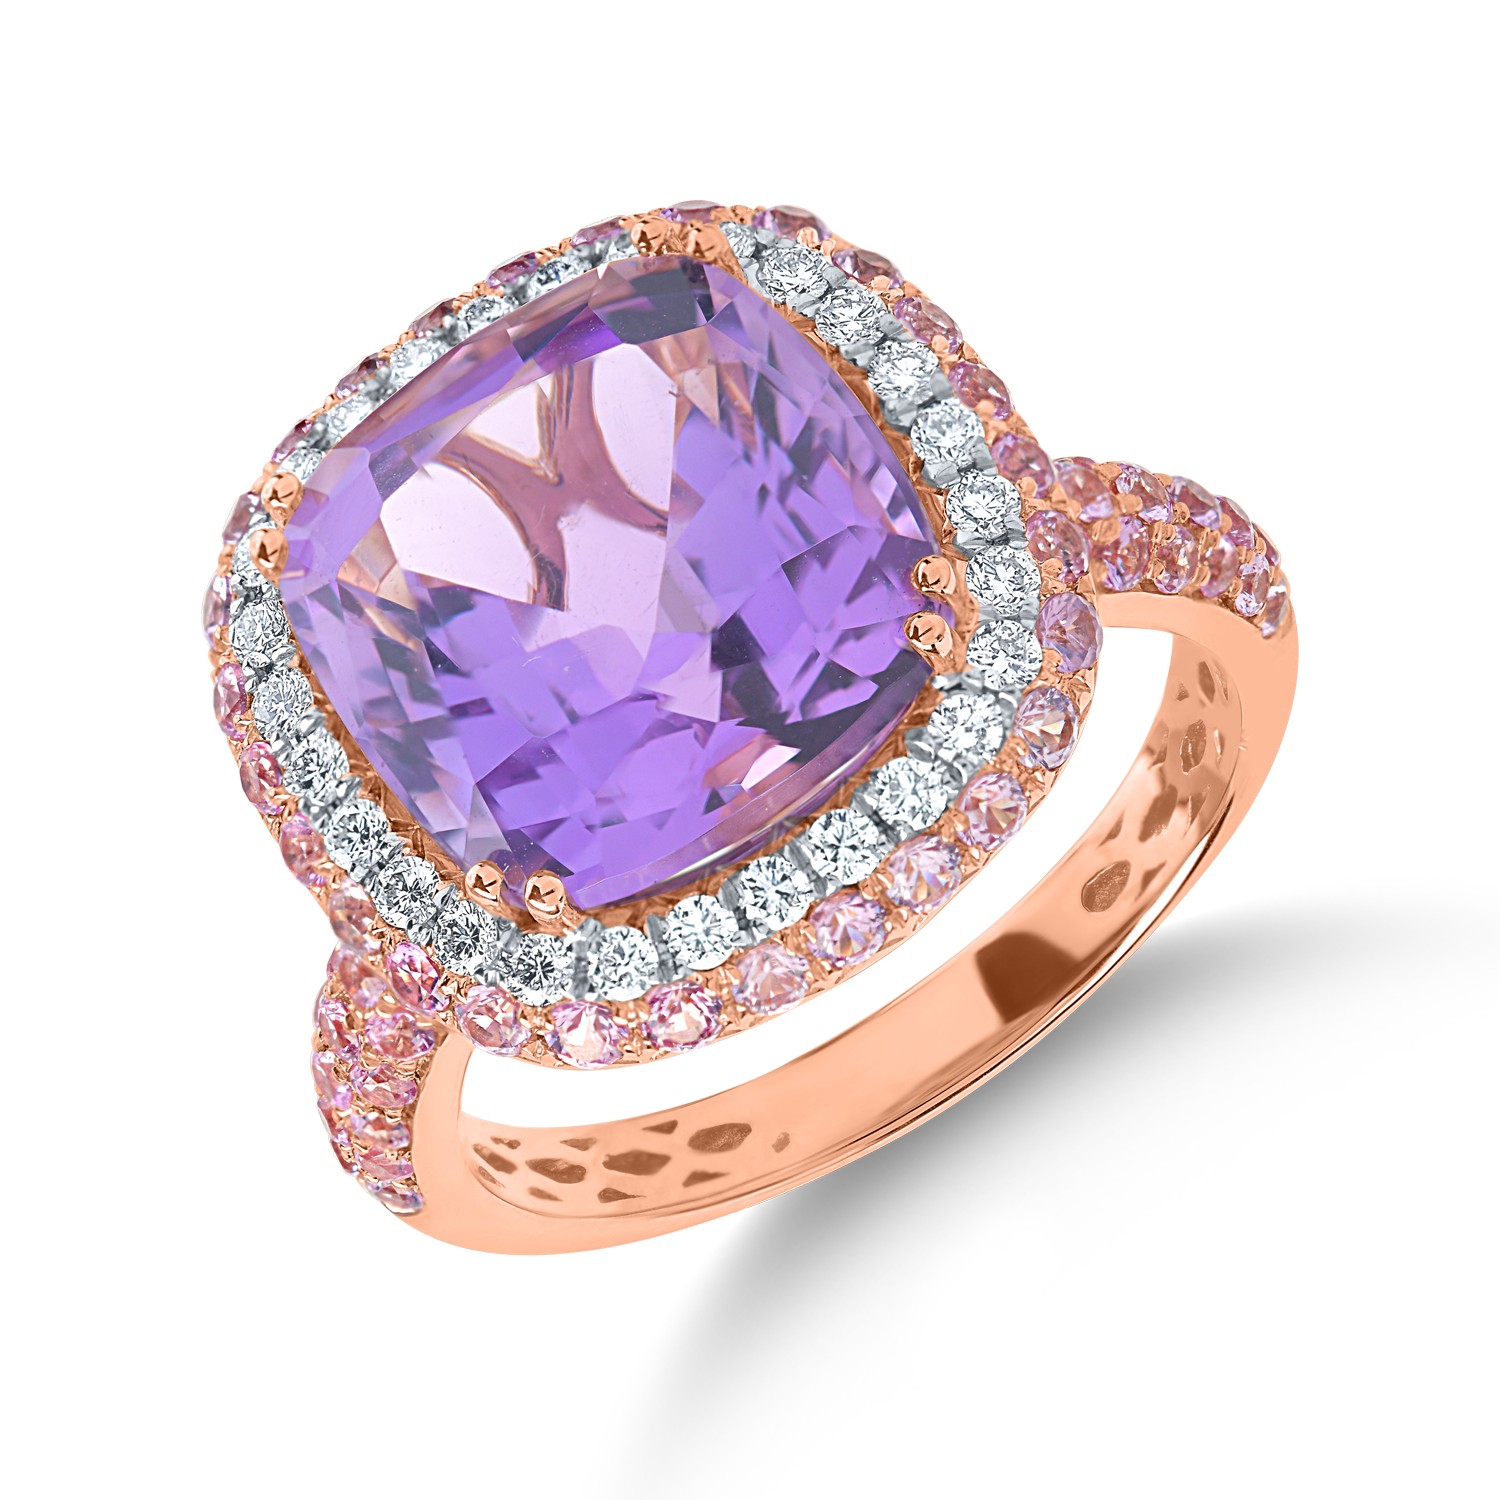 Rose gold ring with 7.2ct precious and semi-precious stones